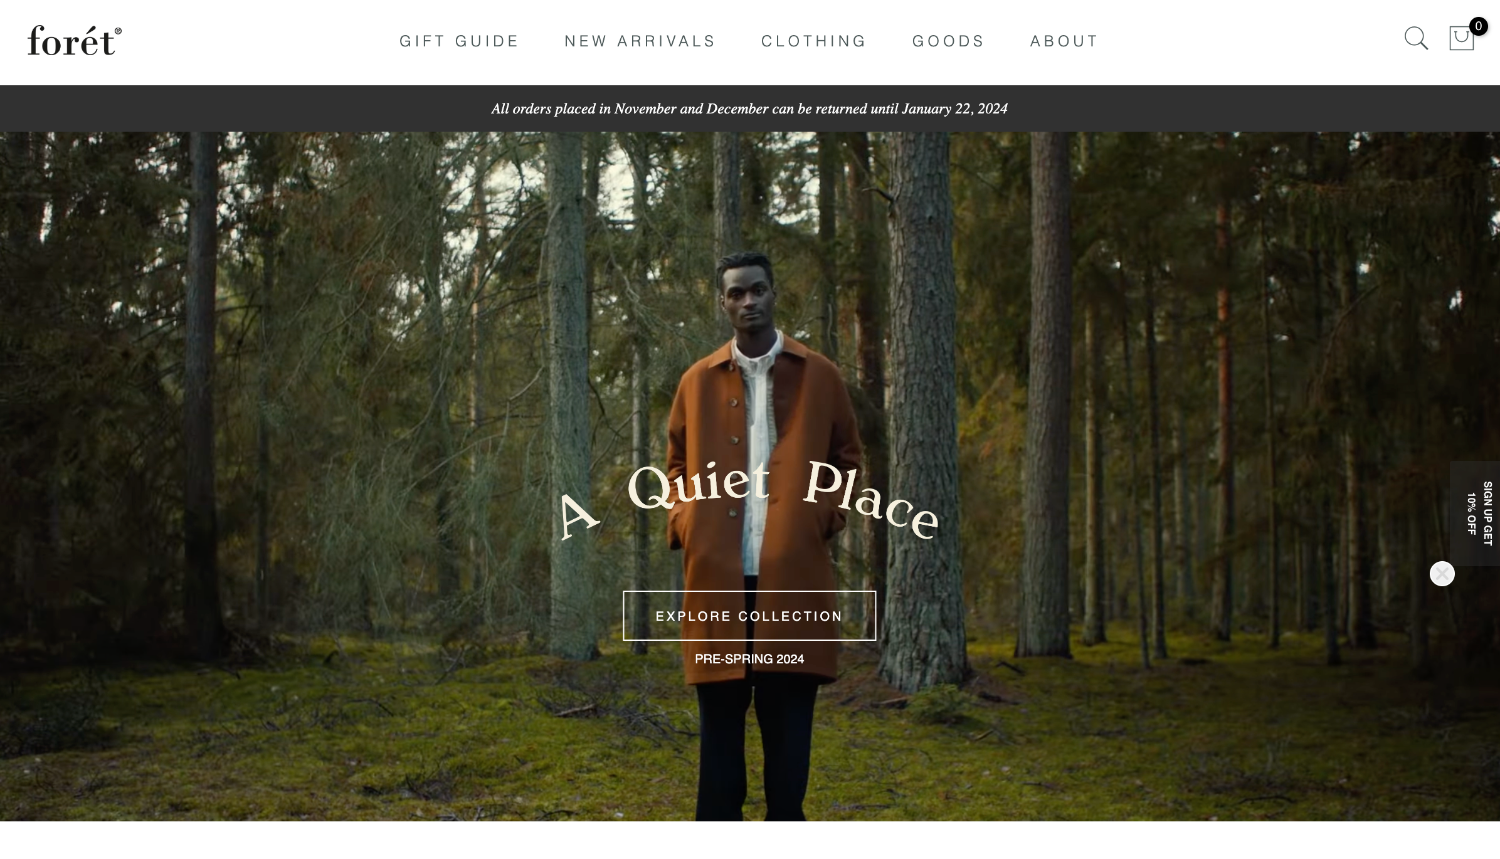 Ecommerce website page for brand foret